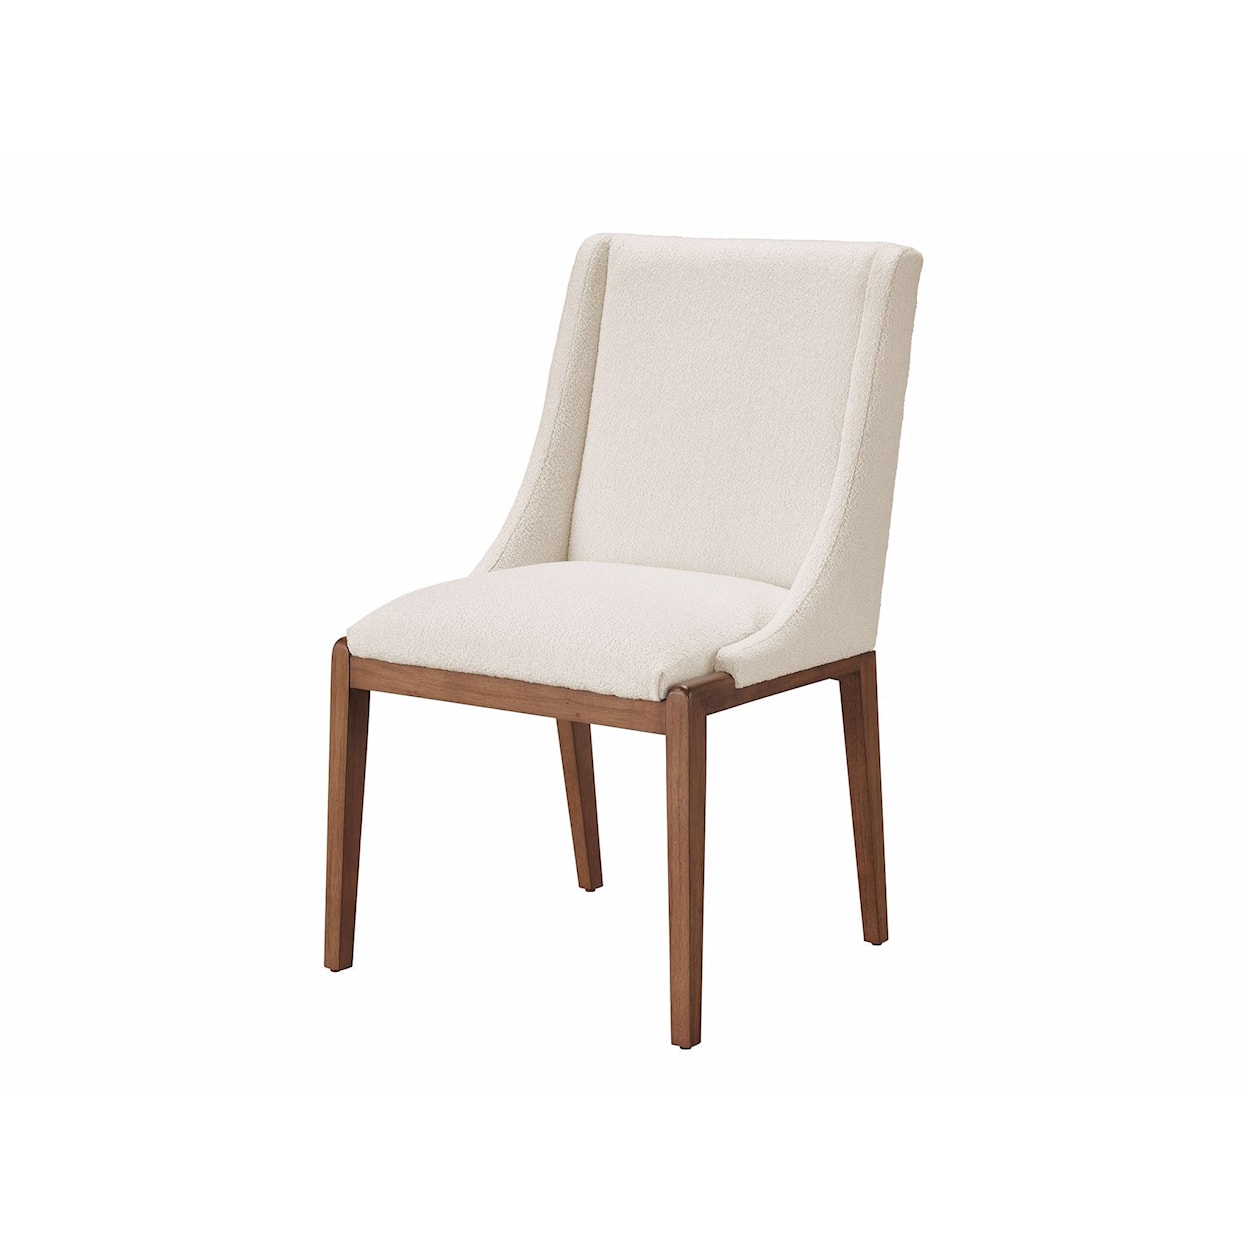 Universal Tranquility - Miranda Kerr Home Tranquility Dining Chair